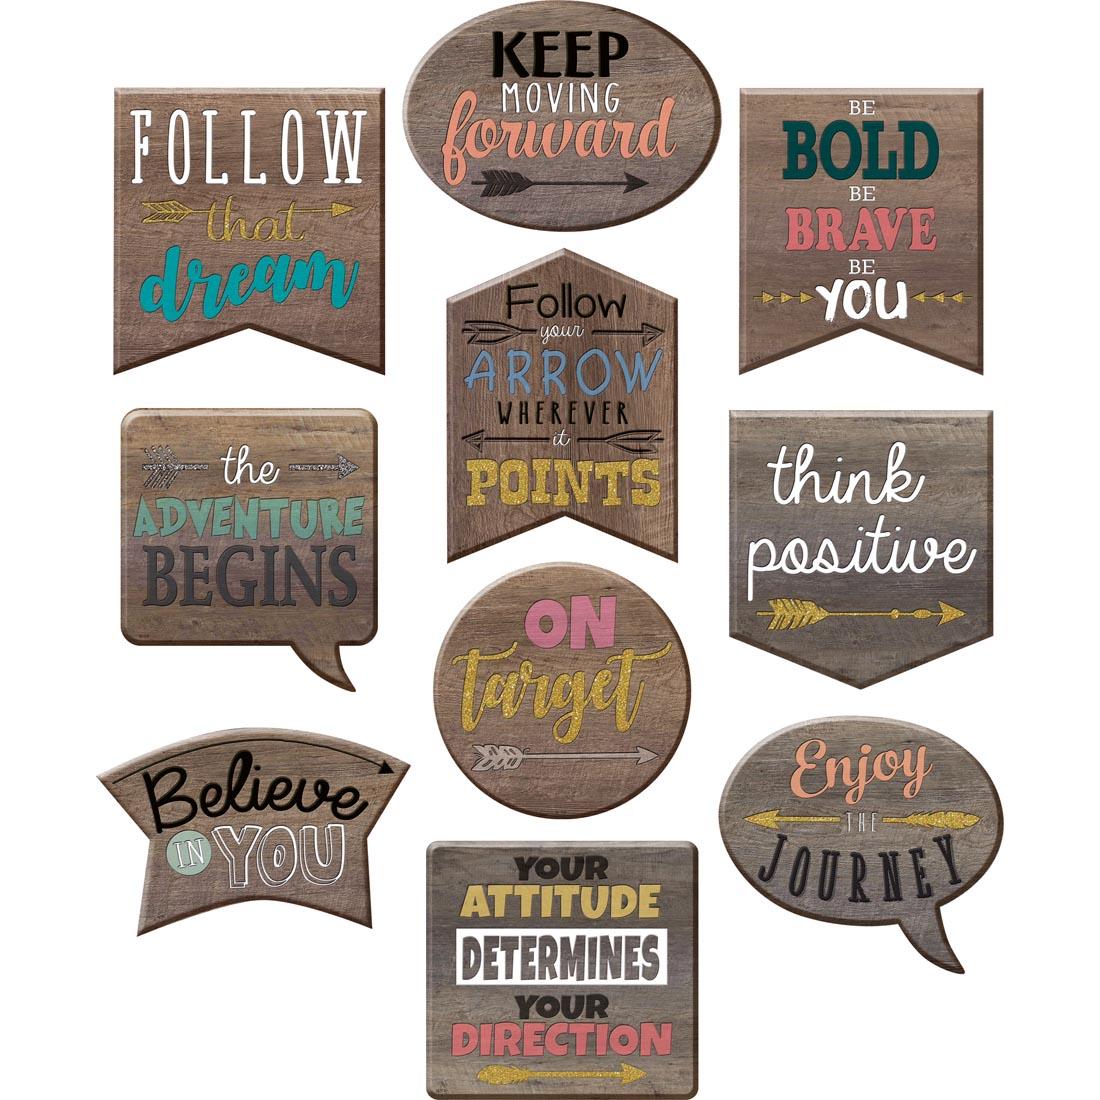 Positive Sayings Accents from the Home Sweet Classroom collection by Teacher Created Resources